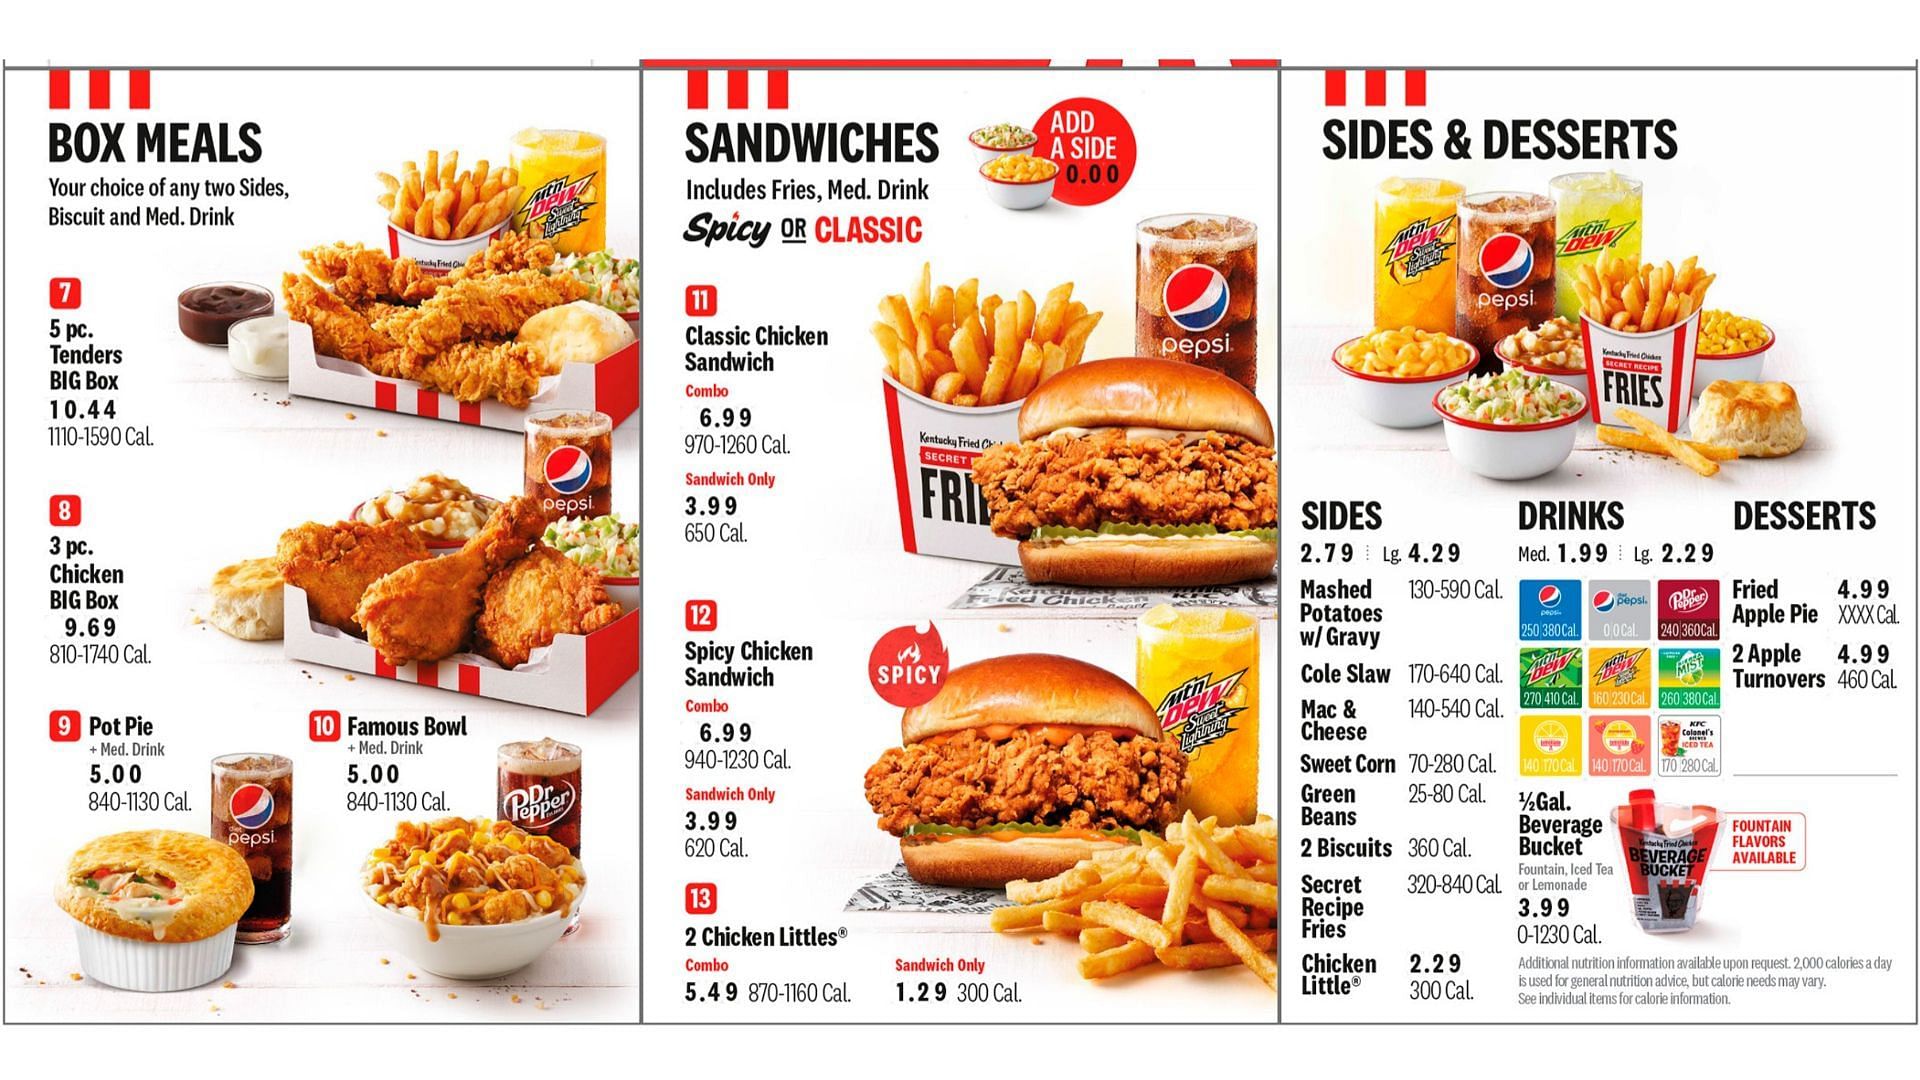 The new and simplified Kentucky Fried Chicken menu makes navigation and ordering much easier (Image via KFC)